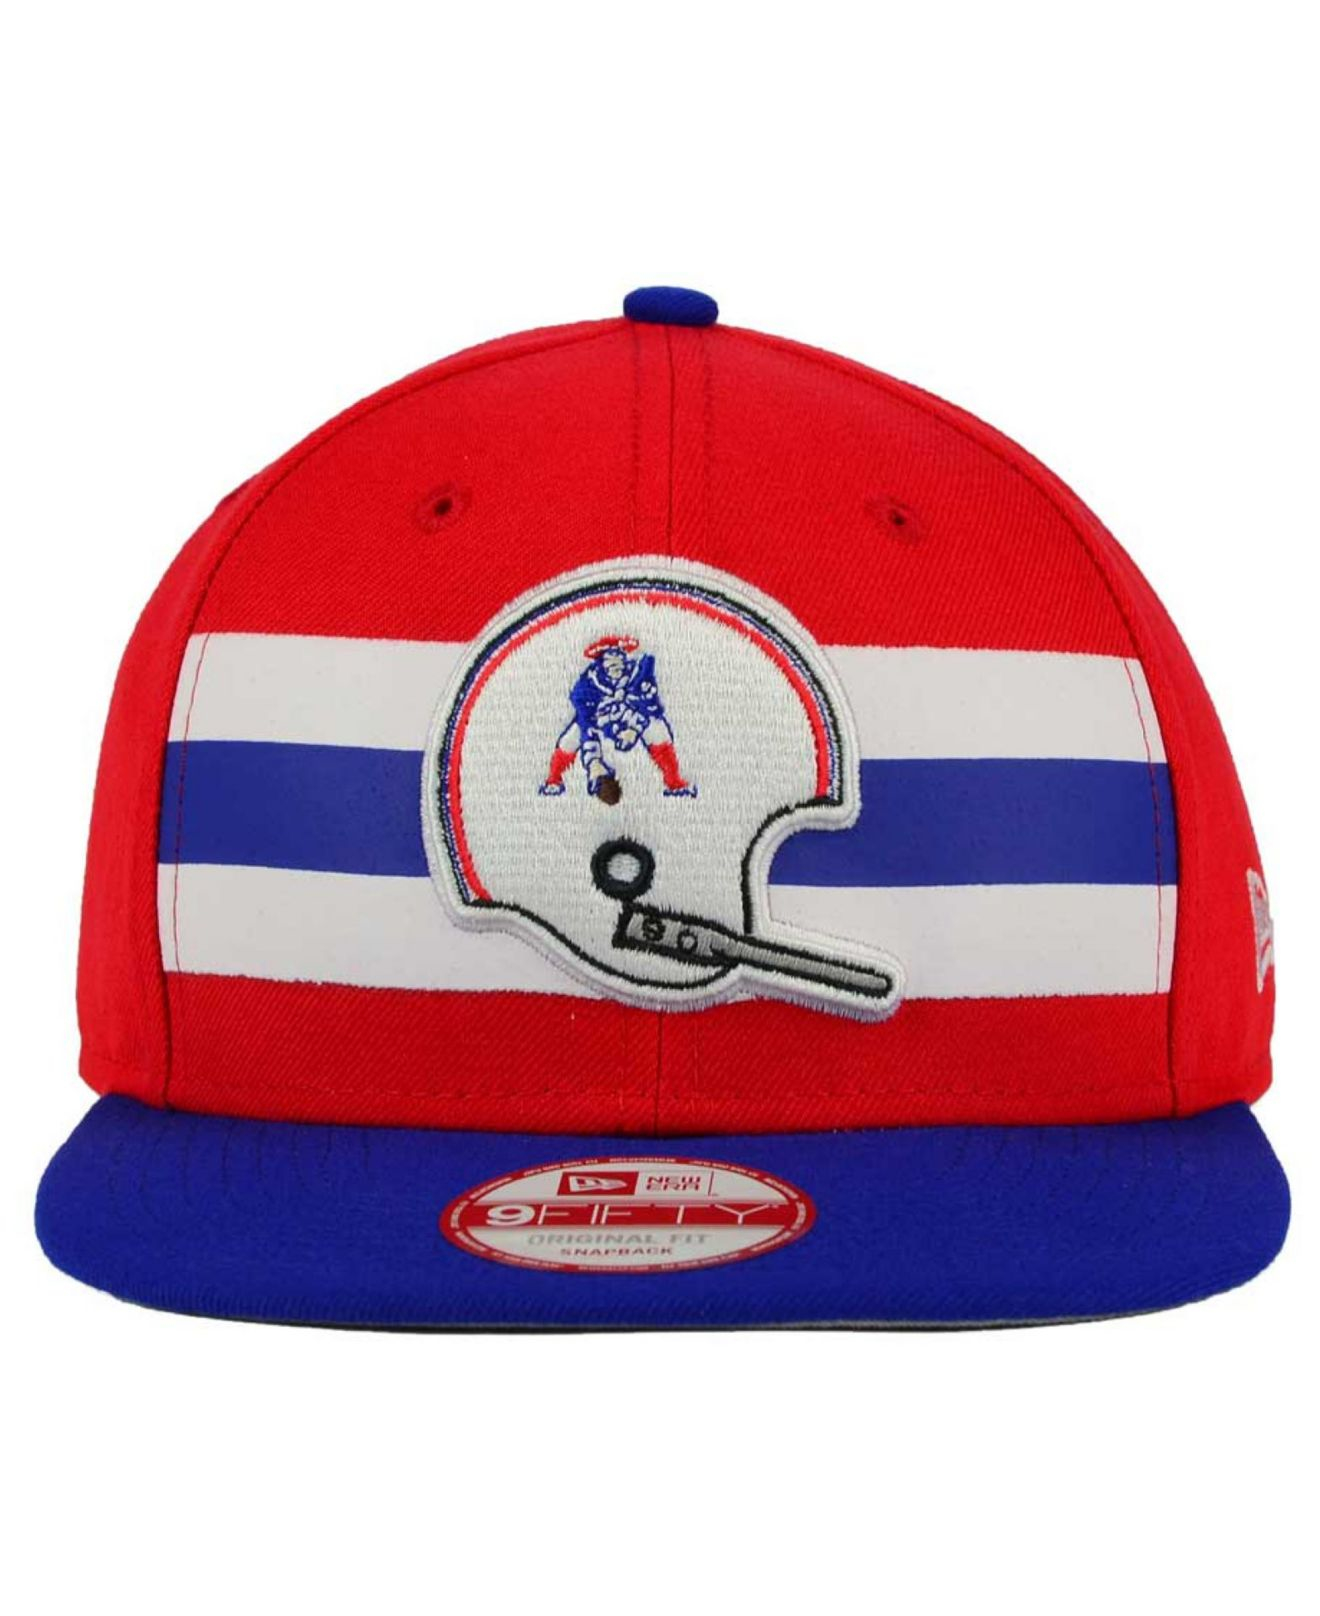 Vintage New England Pat the Patriot Red SnapBack Hat